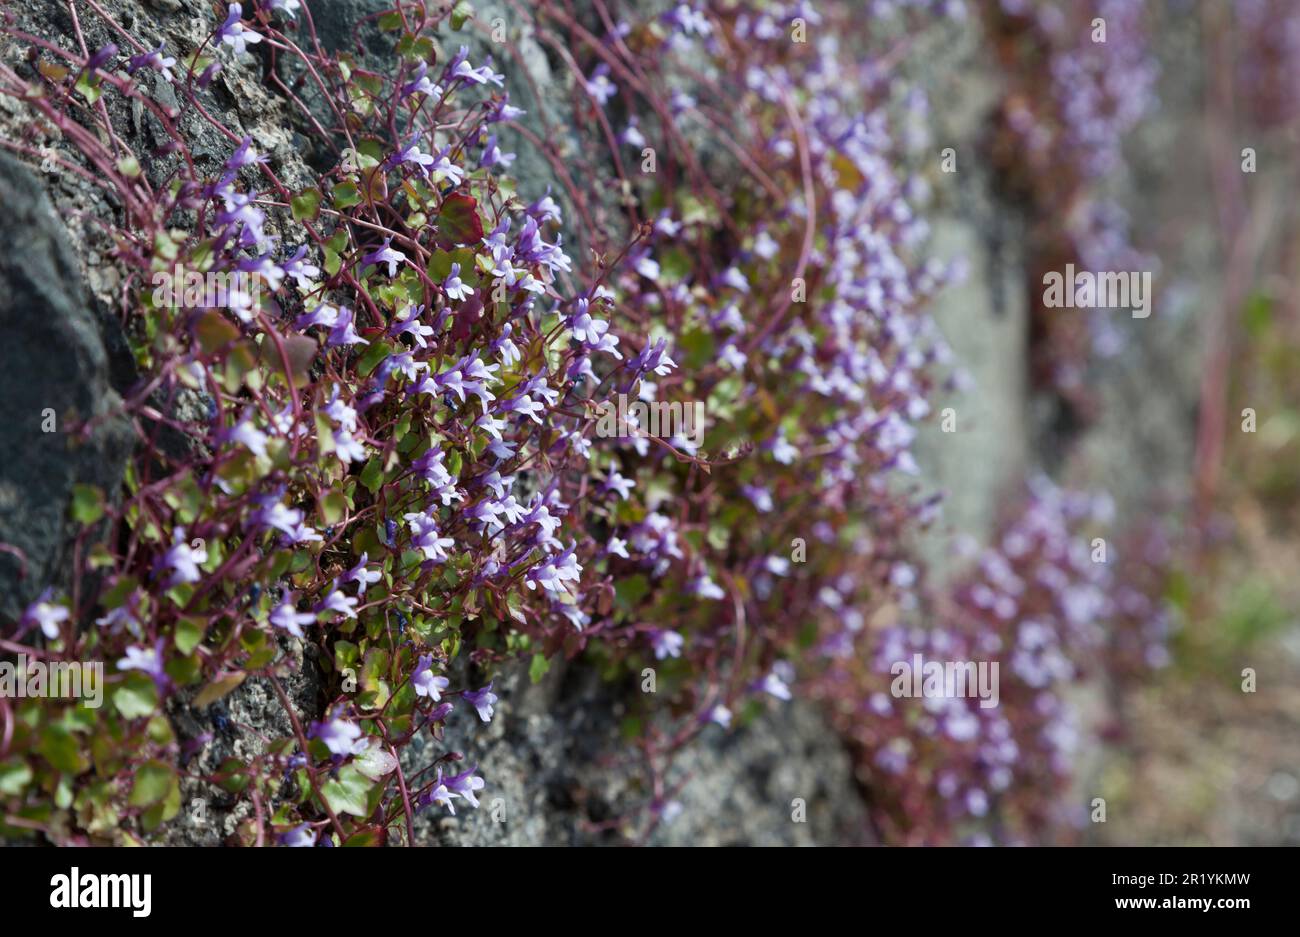 Linaria cymbalaria - Ivy leaved toadflax growing on a stone wall. Stock Photo